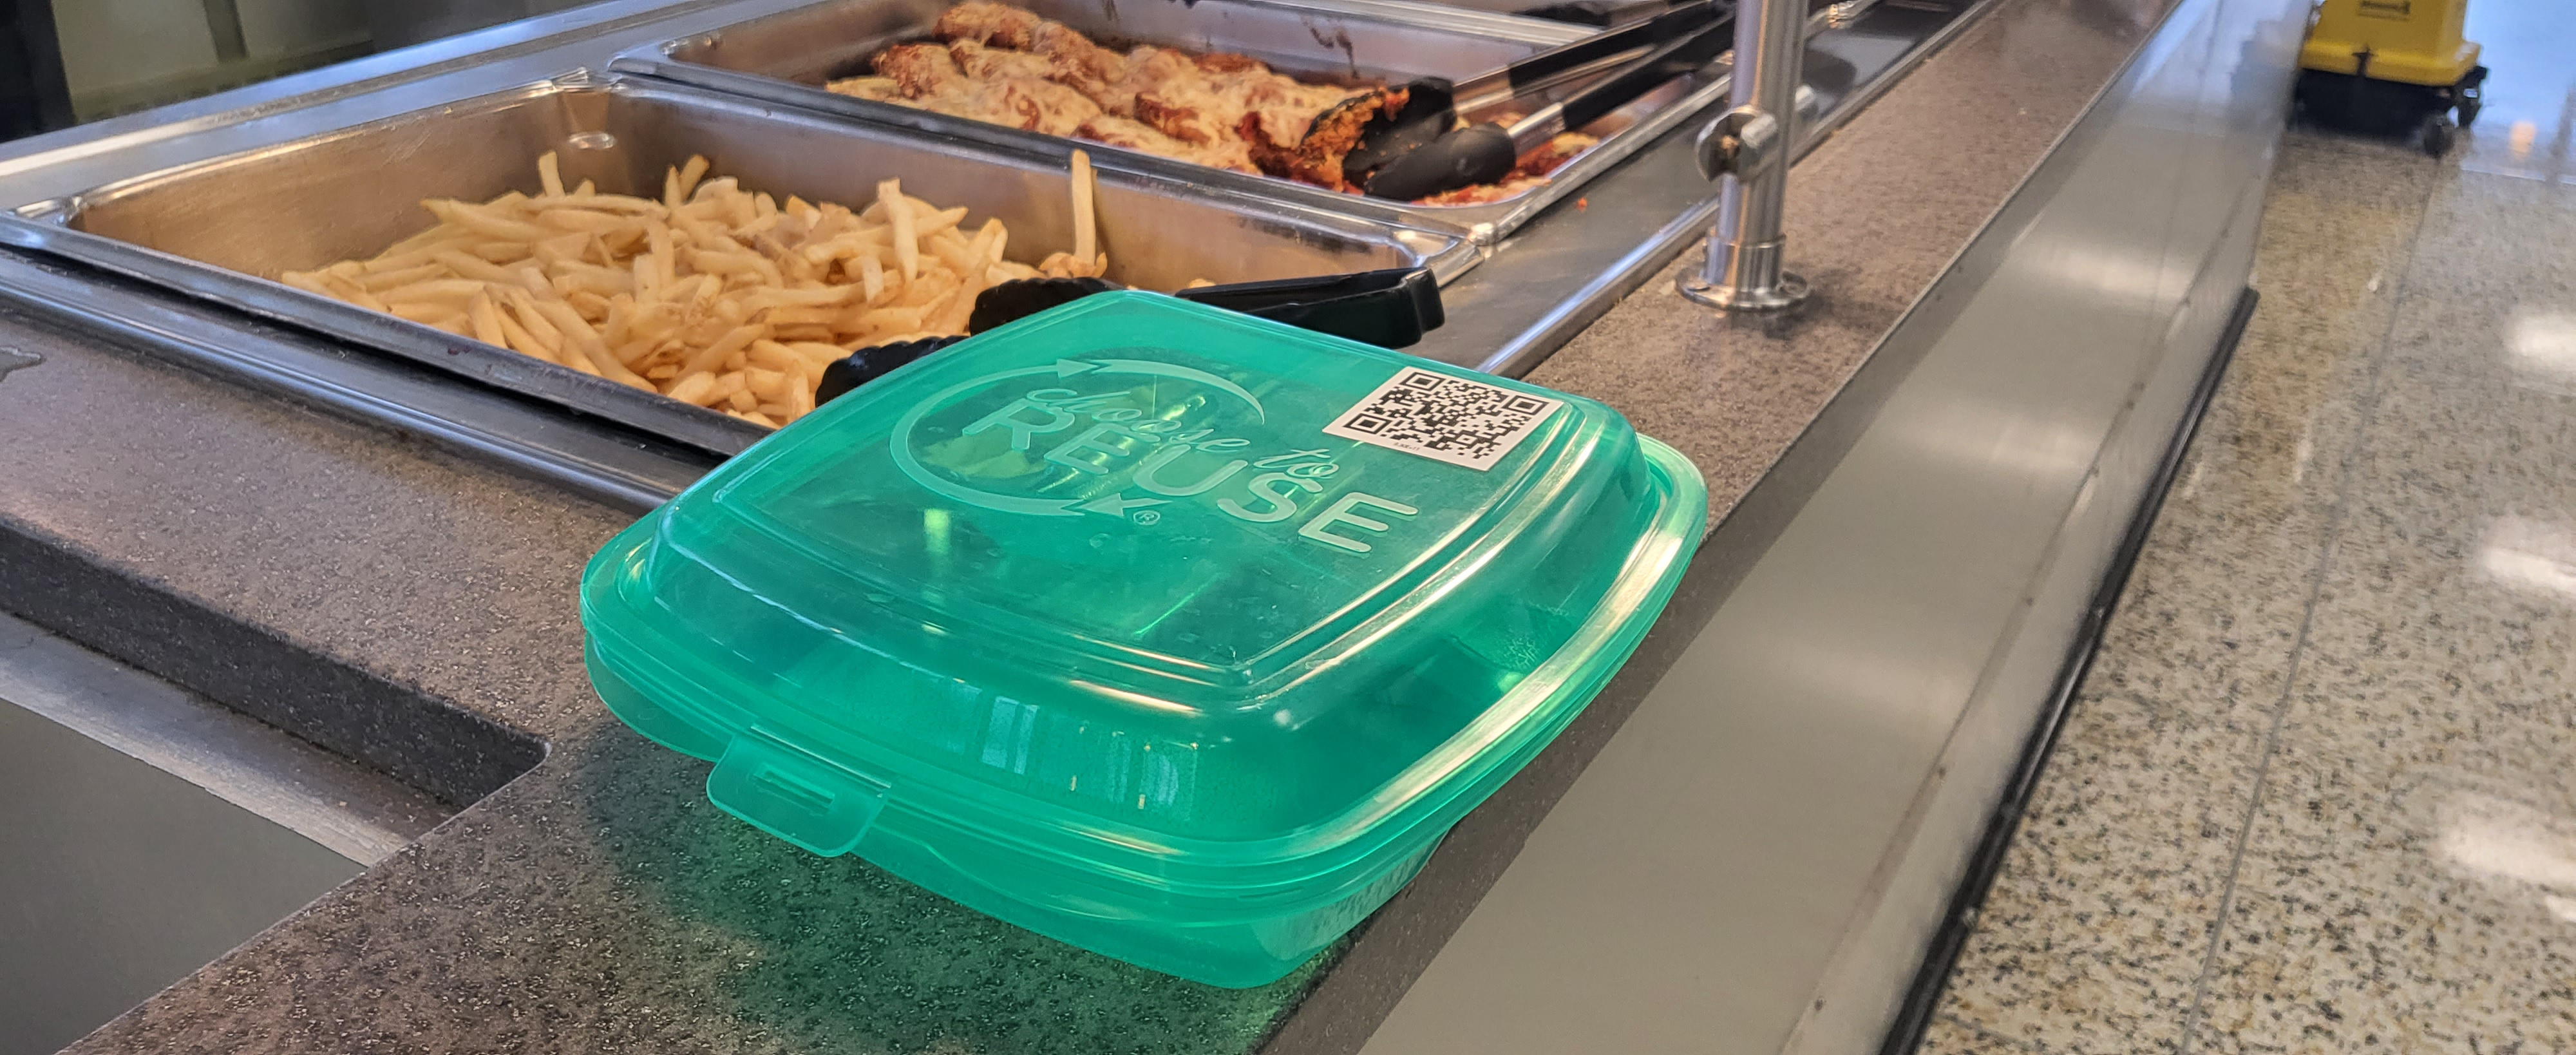 Reusable Container Program, Dining Services